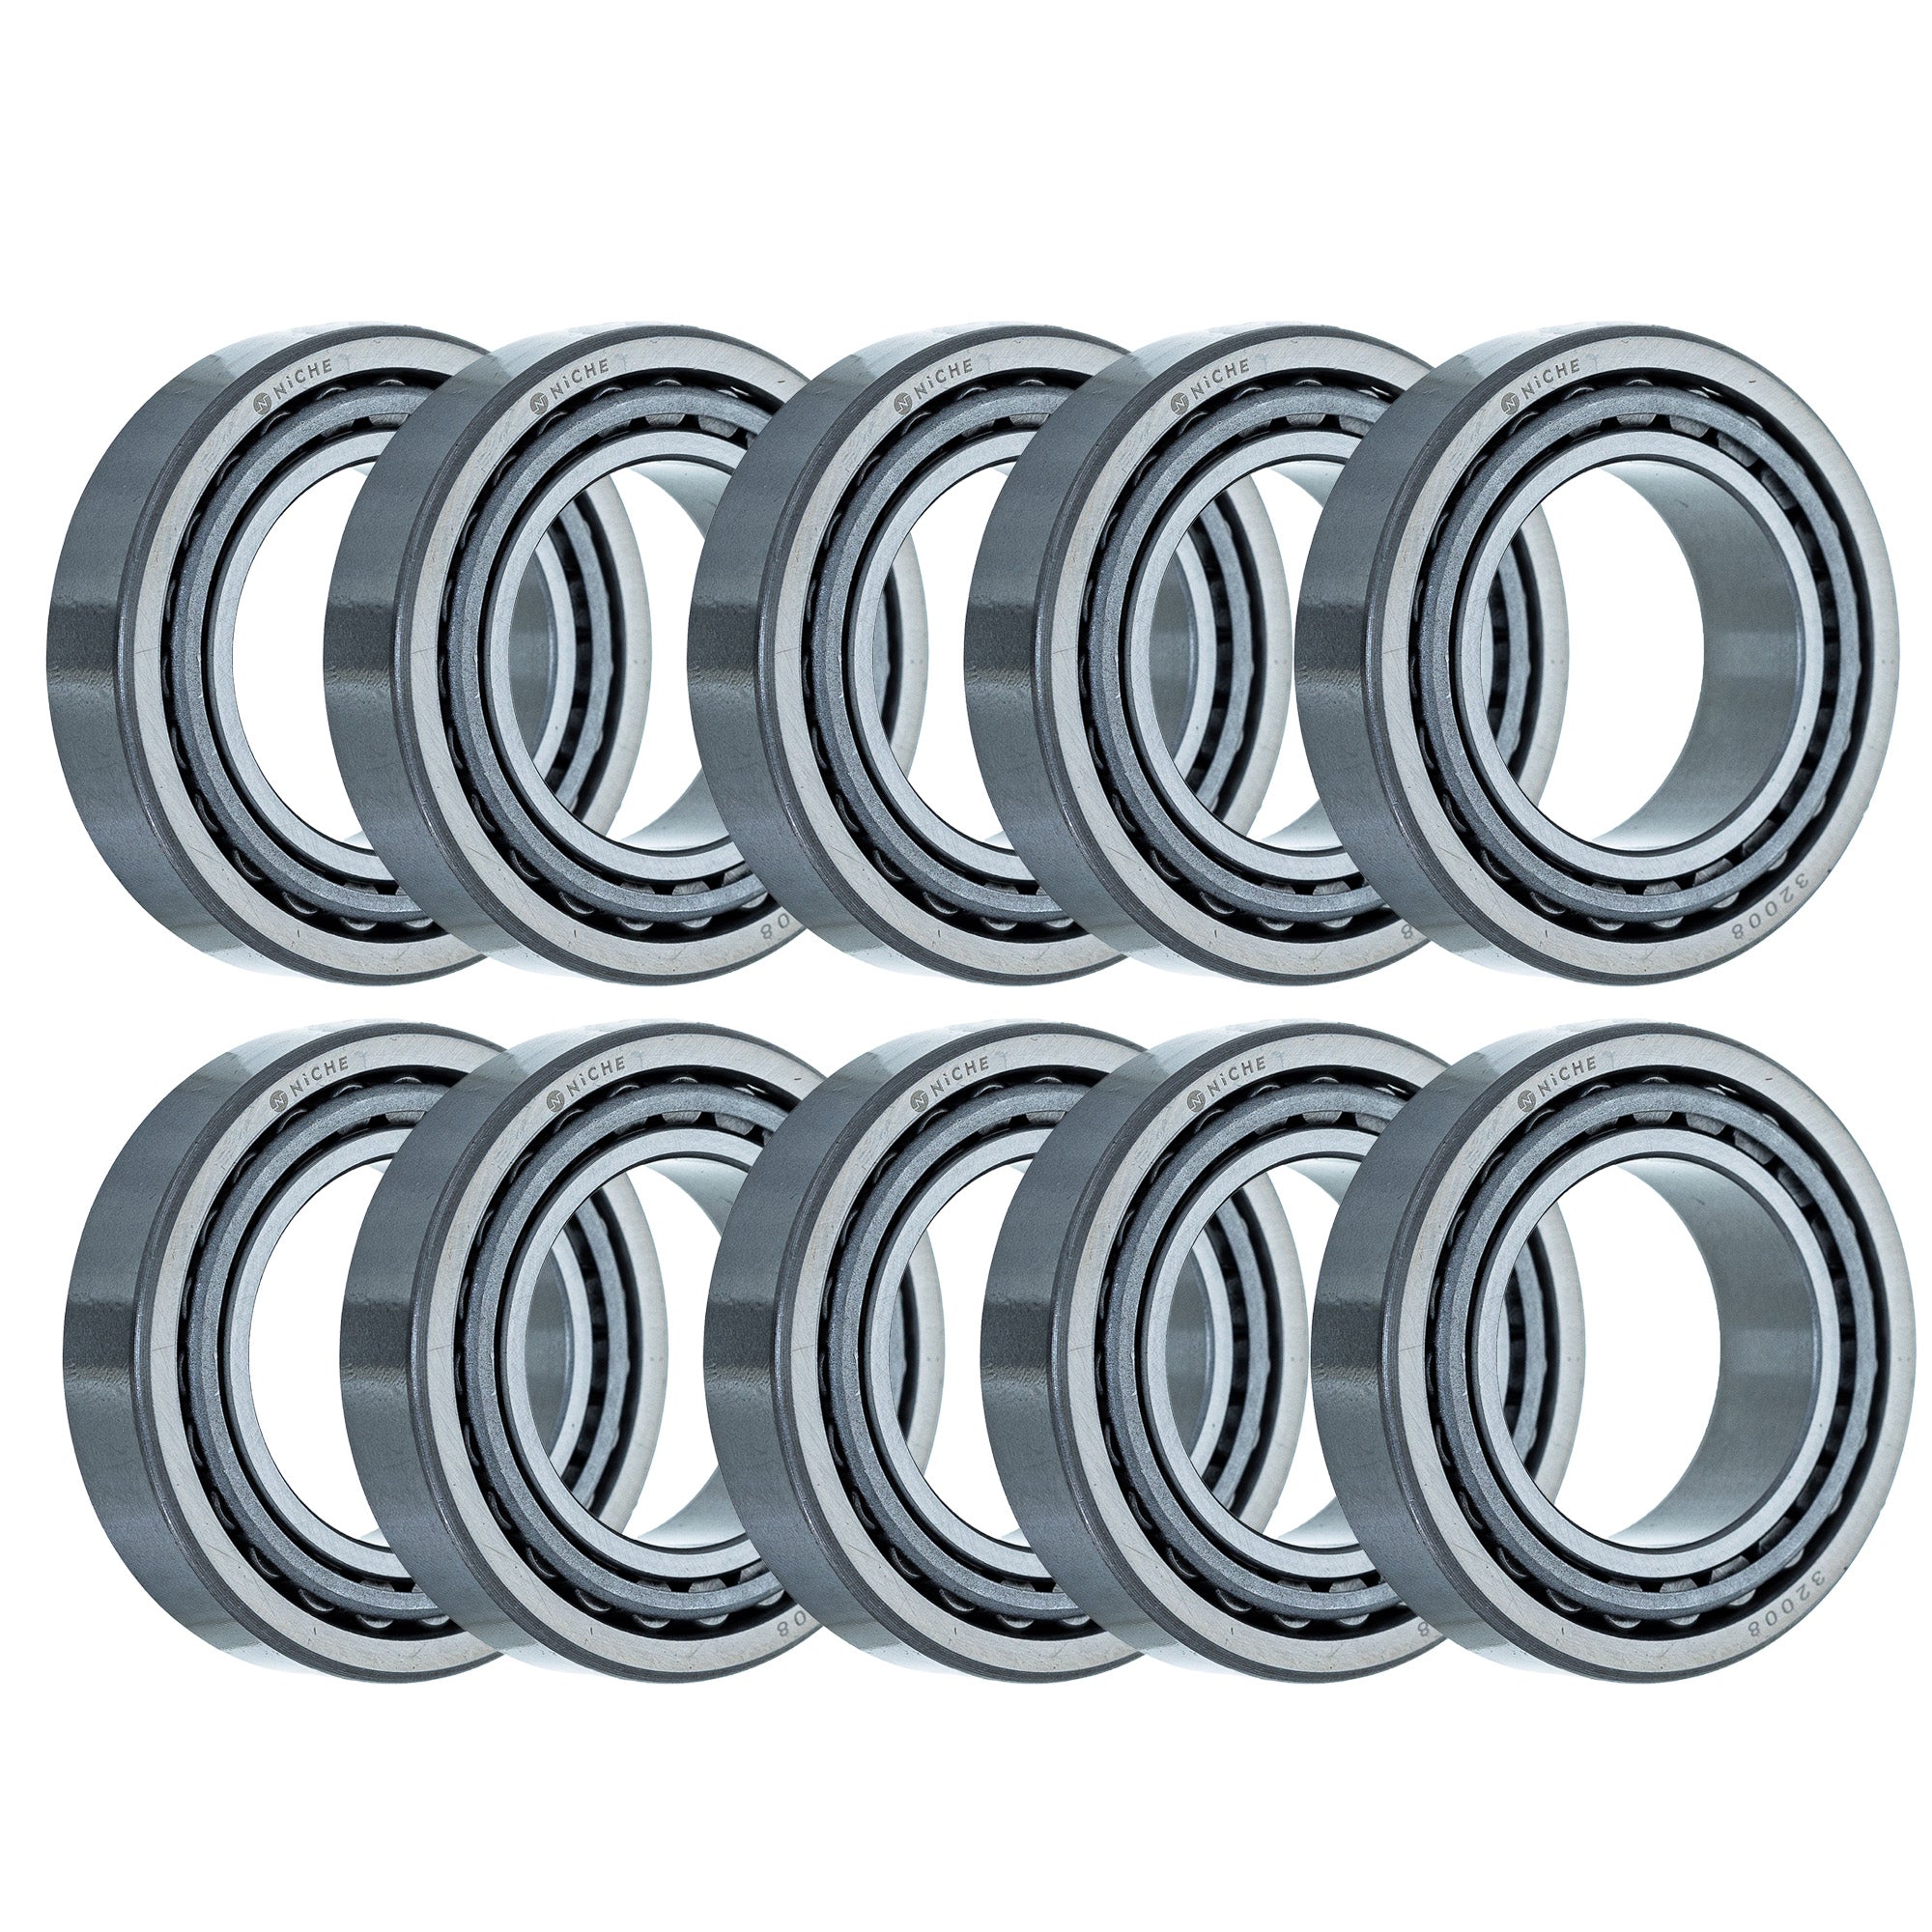 Tapered Roller Bearing Pack of 10 10-Pack for zOTHER Predator Outlaw Grand DS650 NICHE 519-CBB2296R